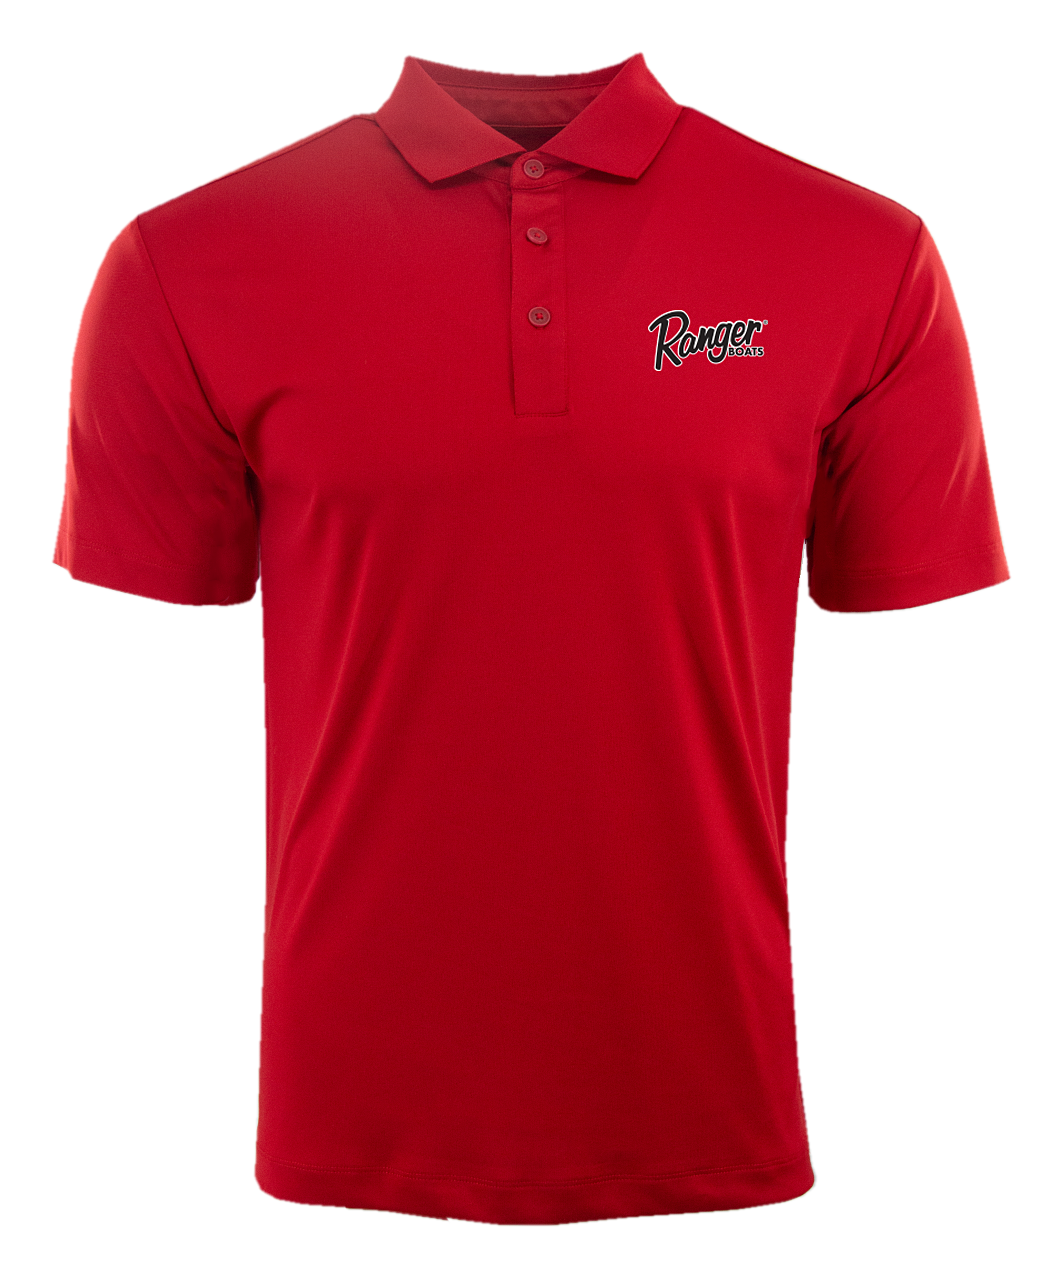 Ranger Boats Performance Athletic-Fit Short-Sleeve Polo Shirt for Men